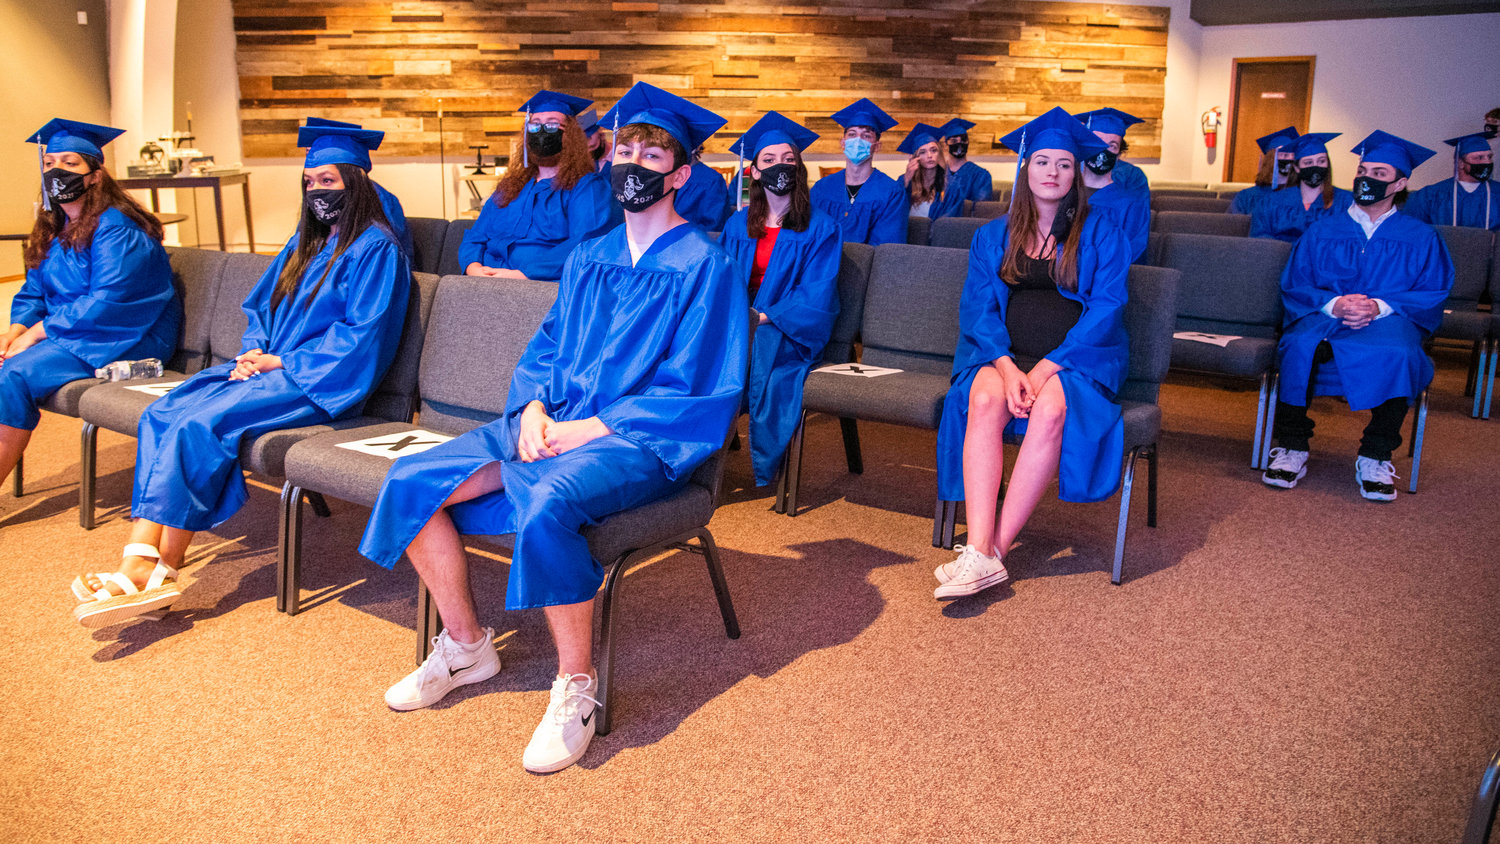 Students prepare to turn their tassels during the Futurus High School graduation cermeony in Centralia Tuesday night.